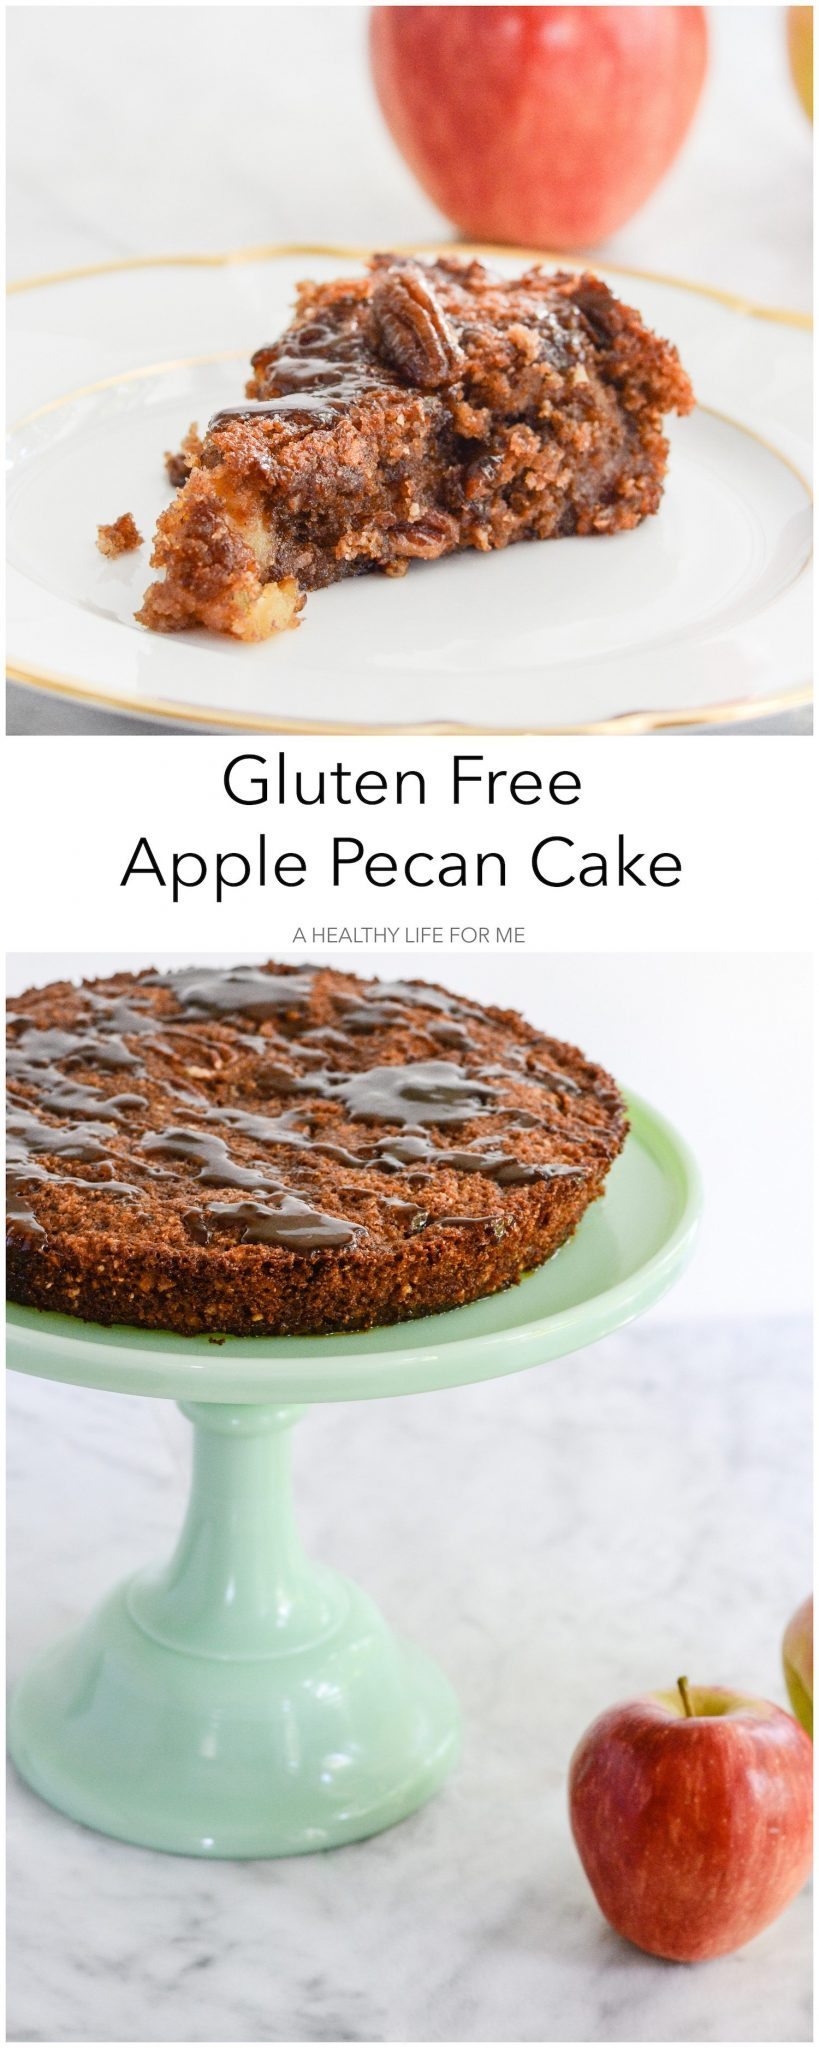 Gluten Free Apple Pecan Cake is ooey gooey deliciousness. Loaded with fresh apples, pecans and sweetened with pure maple syrup | ahealthylifeforme.com